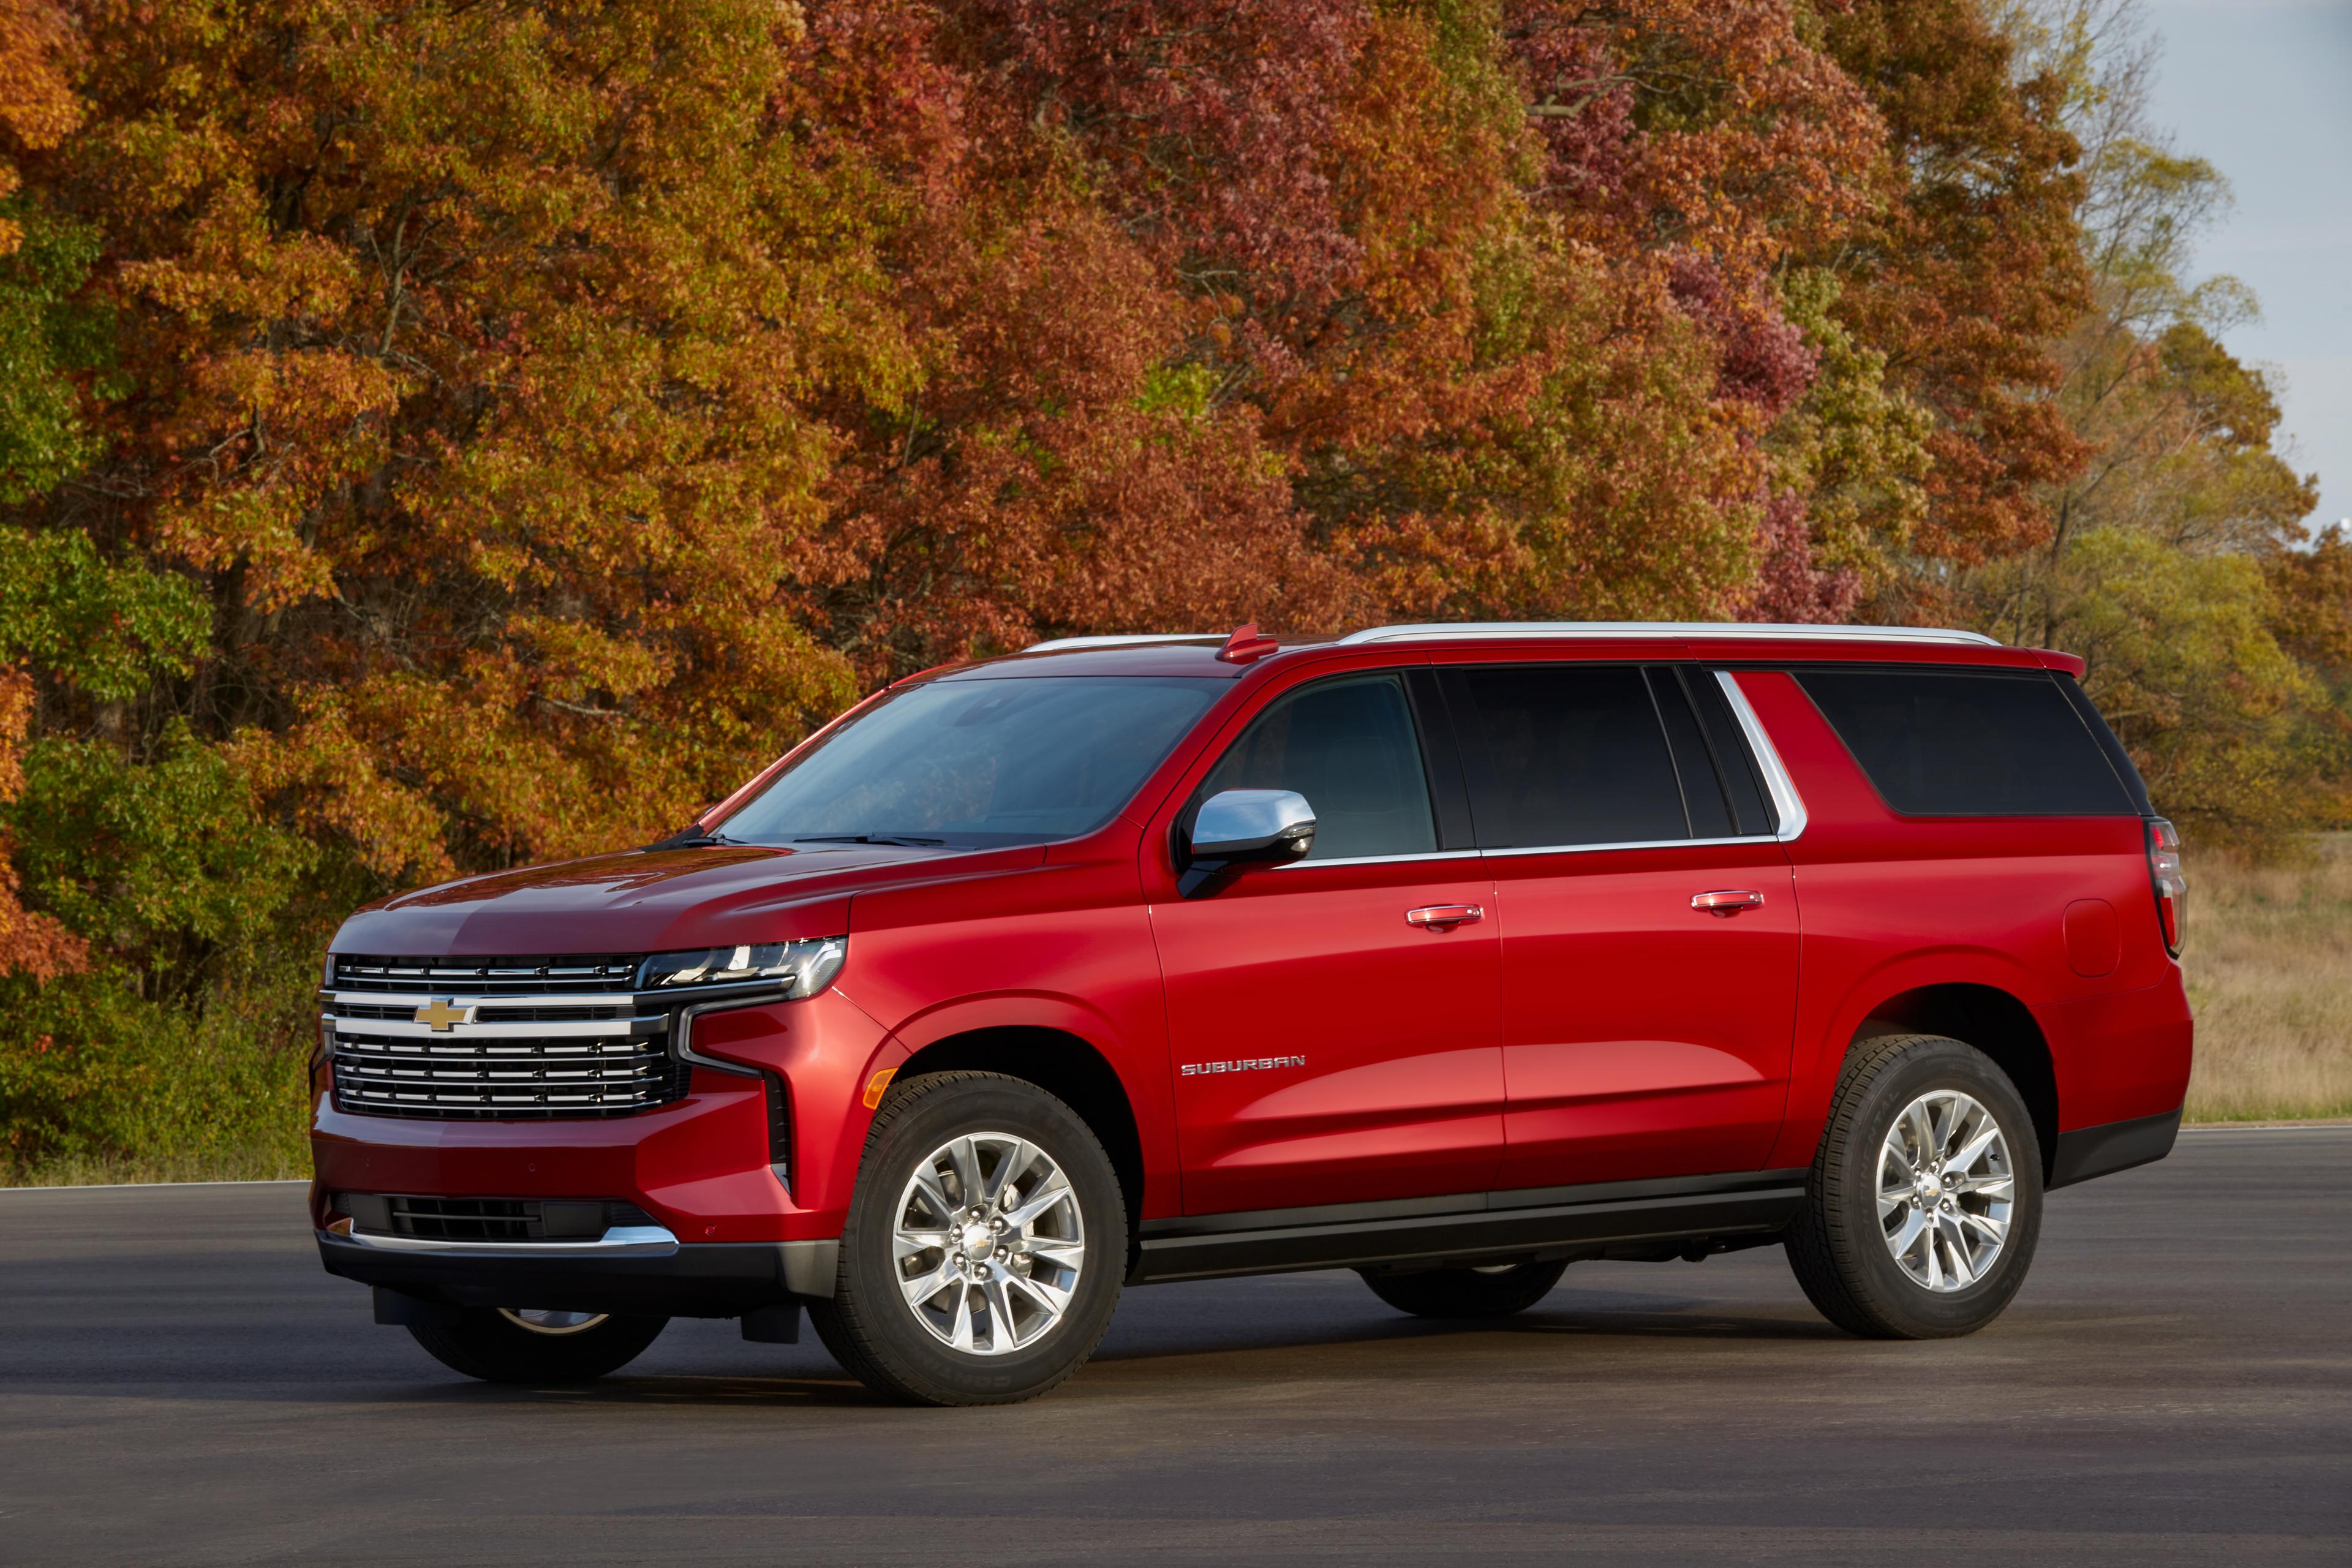 A red 2022 Chevrolet Suburban parked outside next to trees